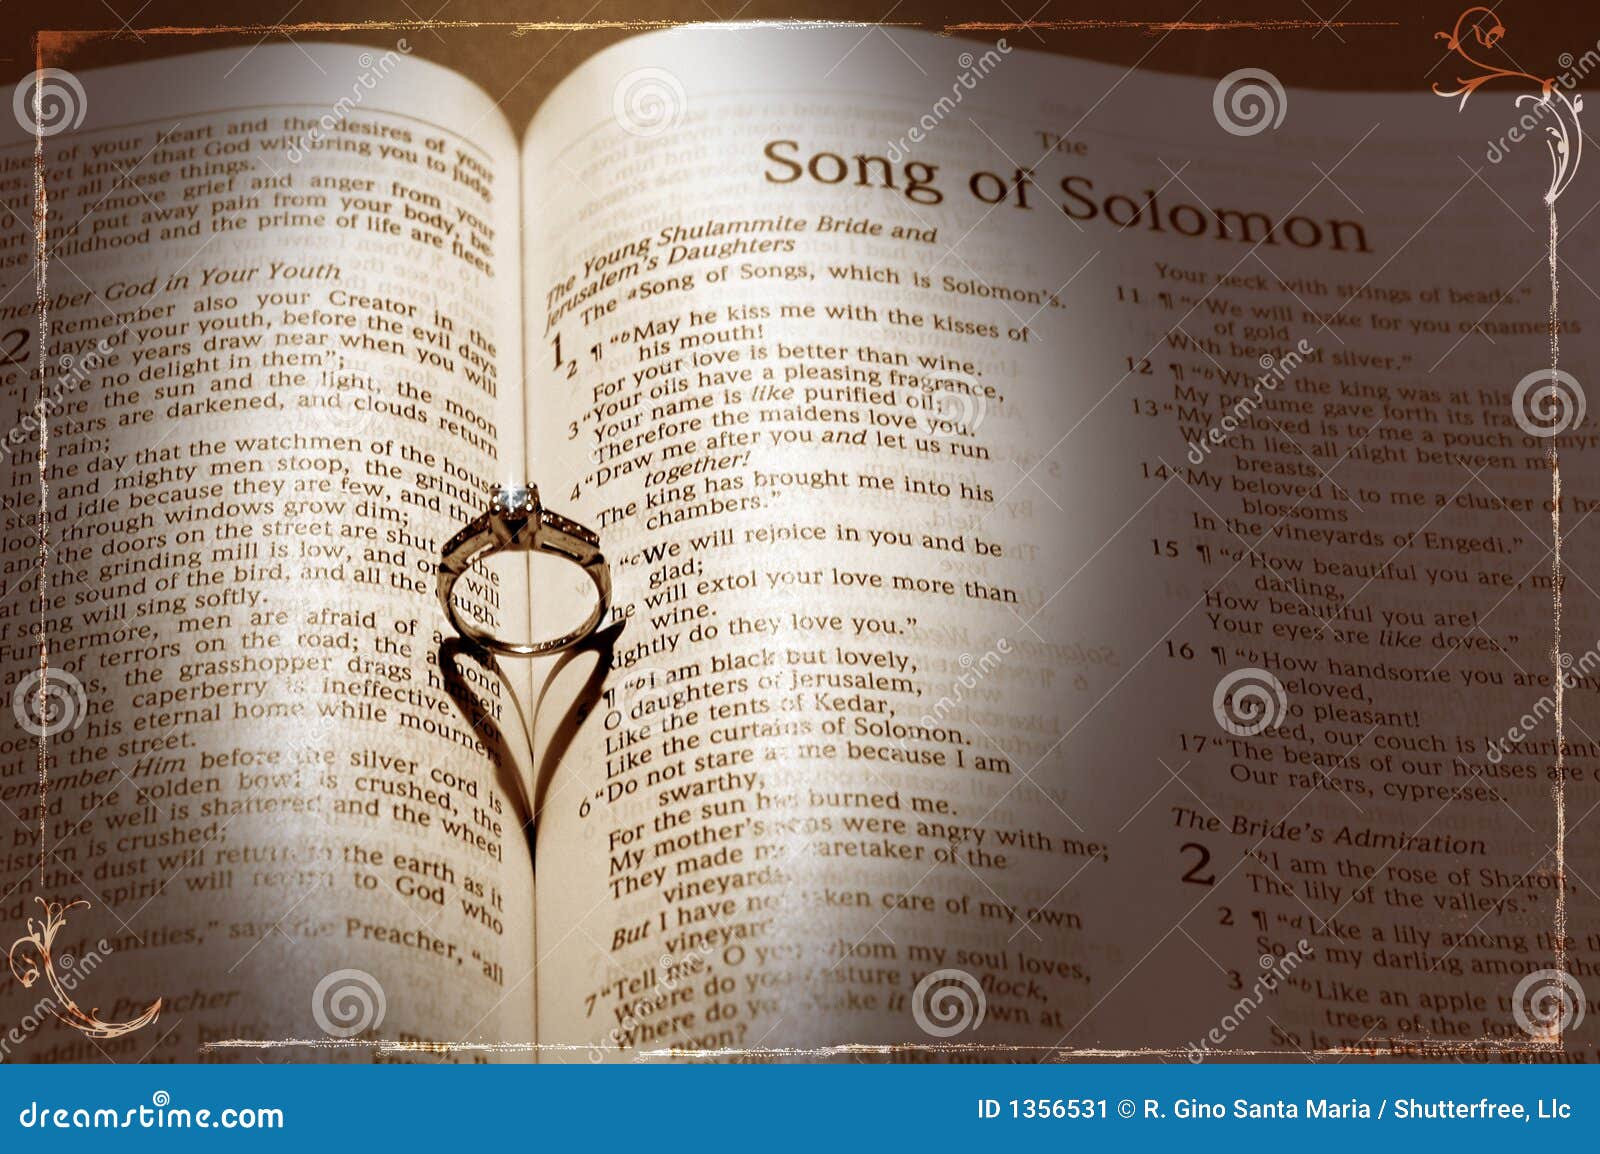 Wedding Ring and heart shaped shadow over a Bible.